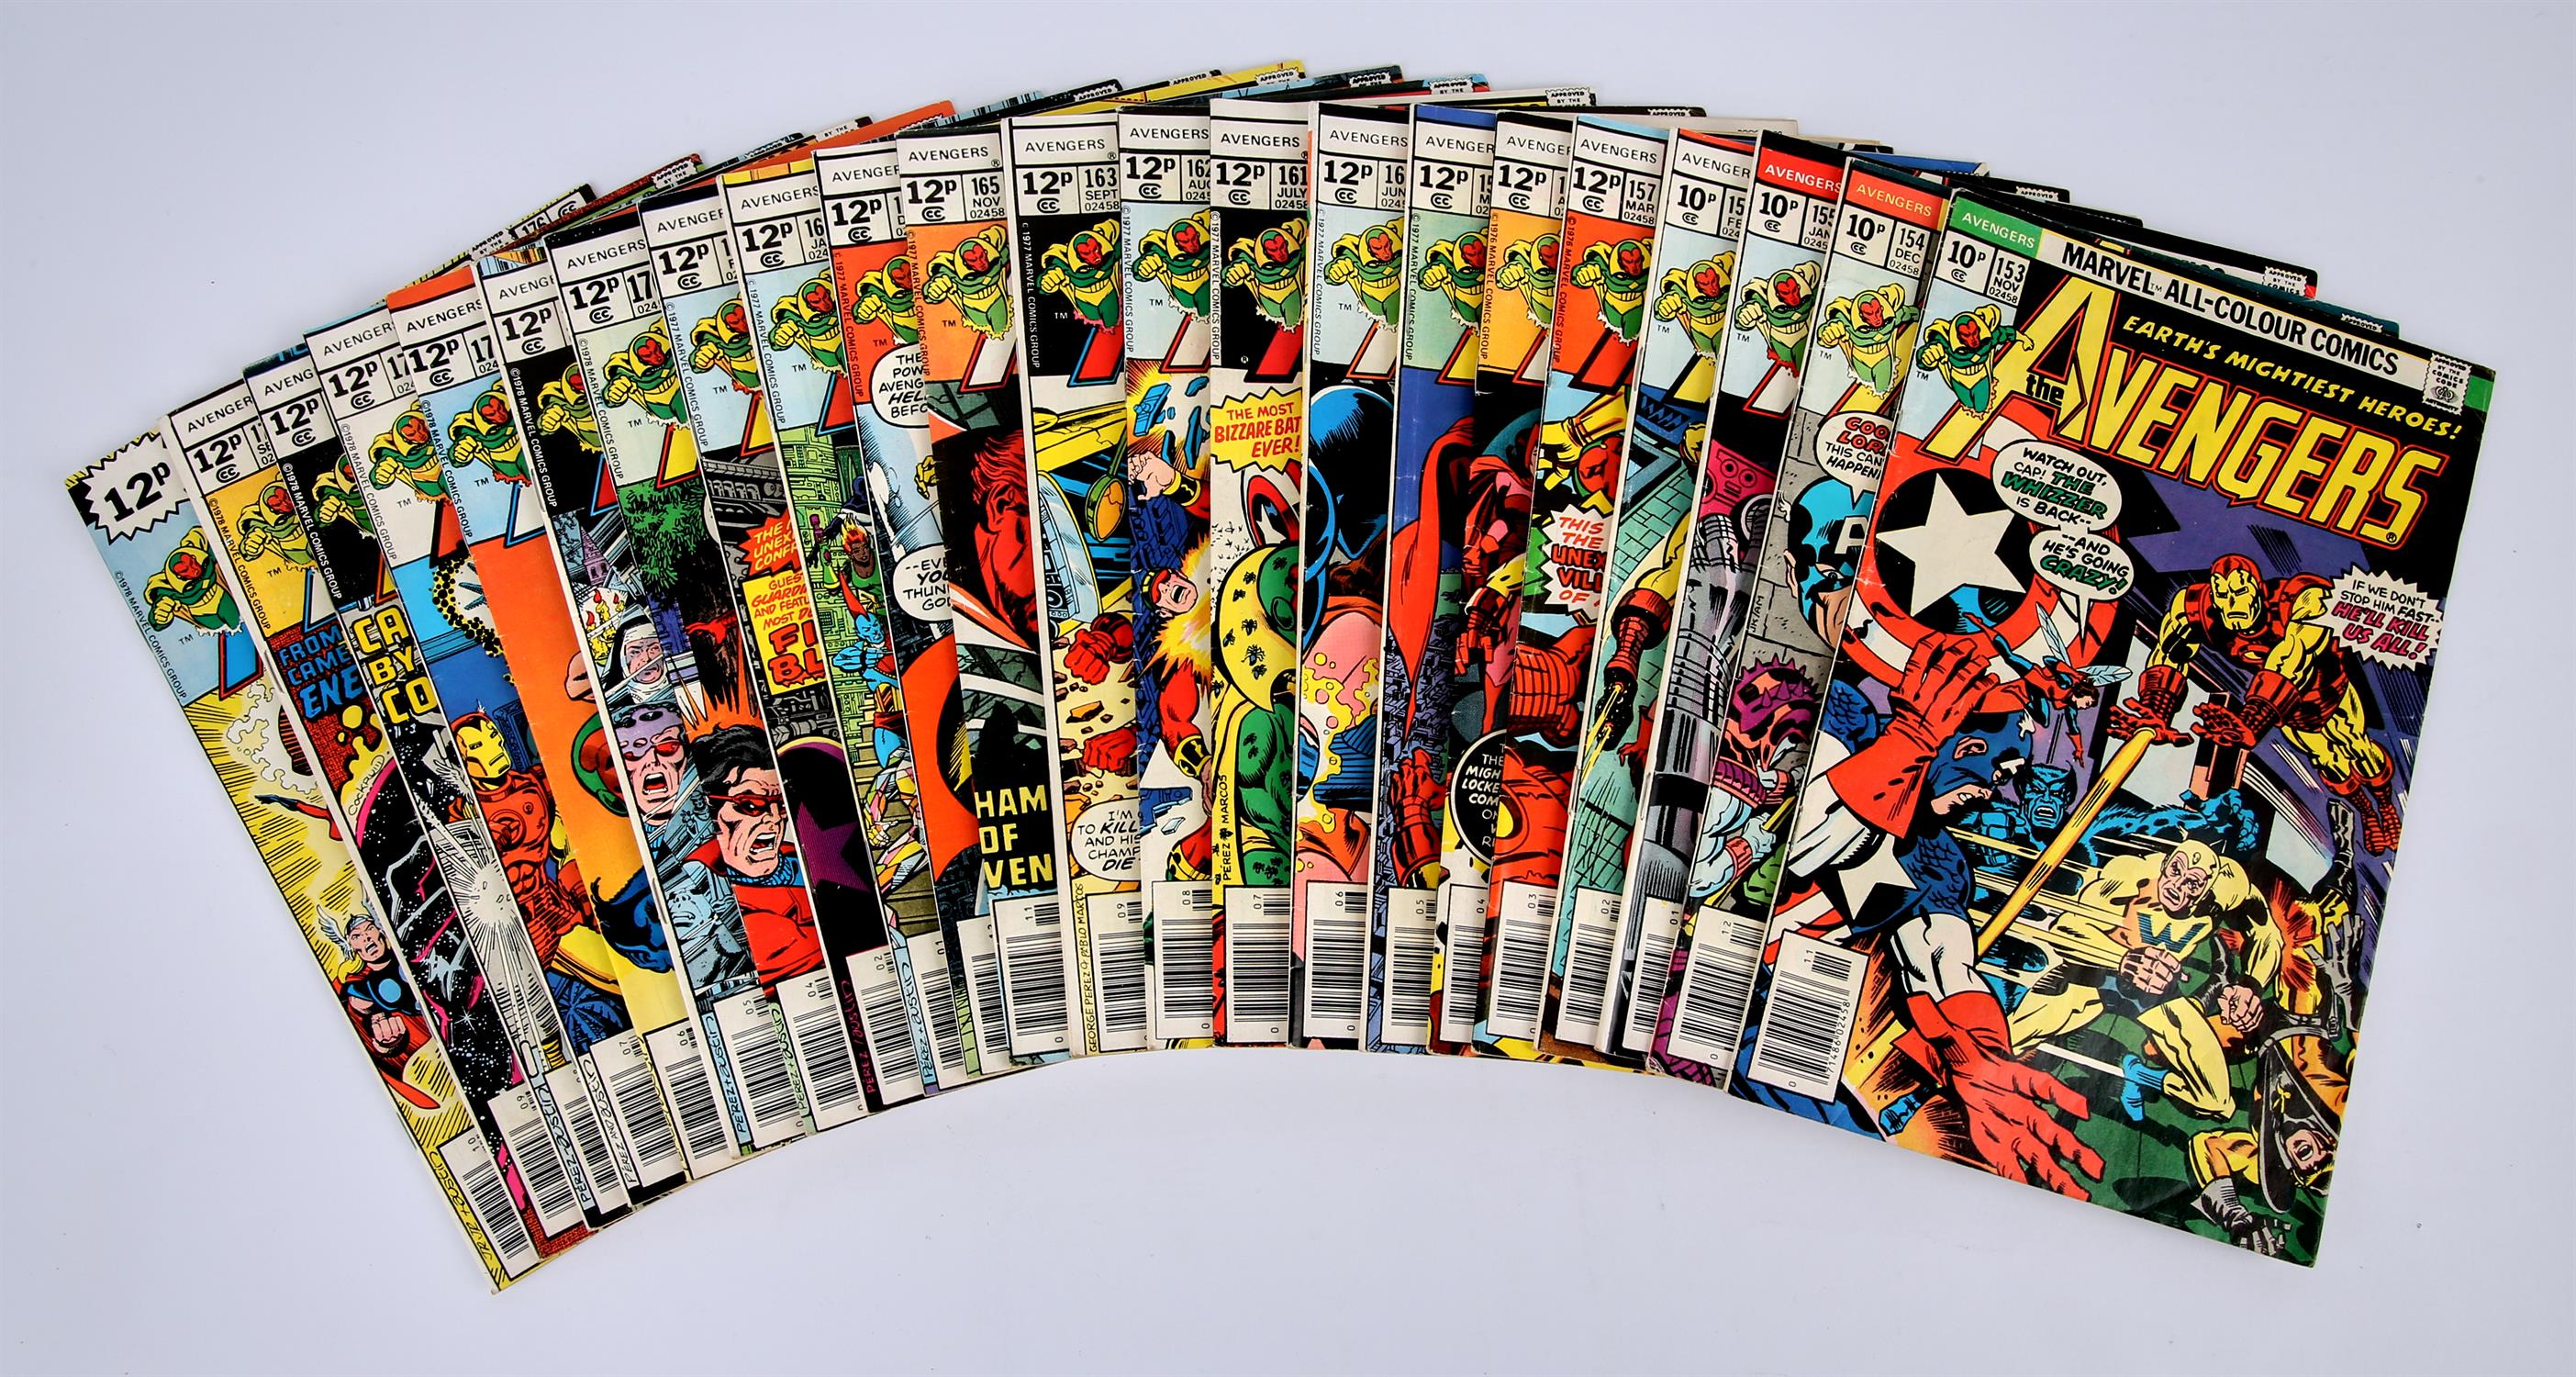 The Avengers: 49 Issues, Including notable issues and classic covers (Marvel Comics, 1976 onwards).